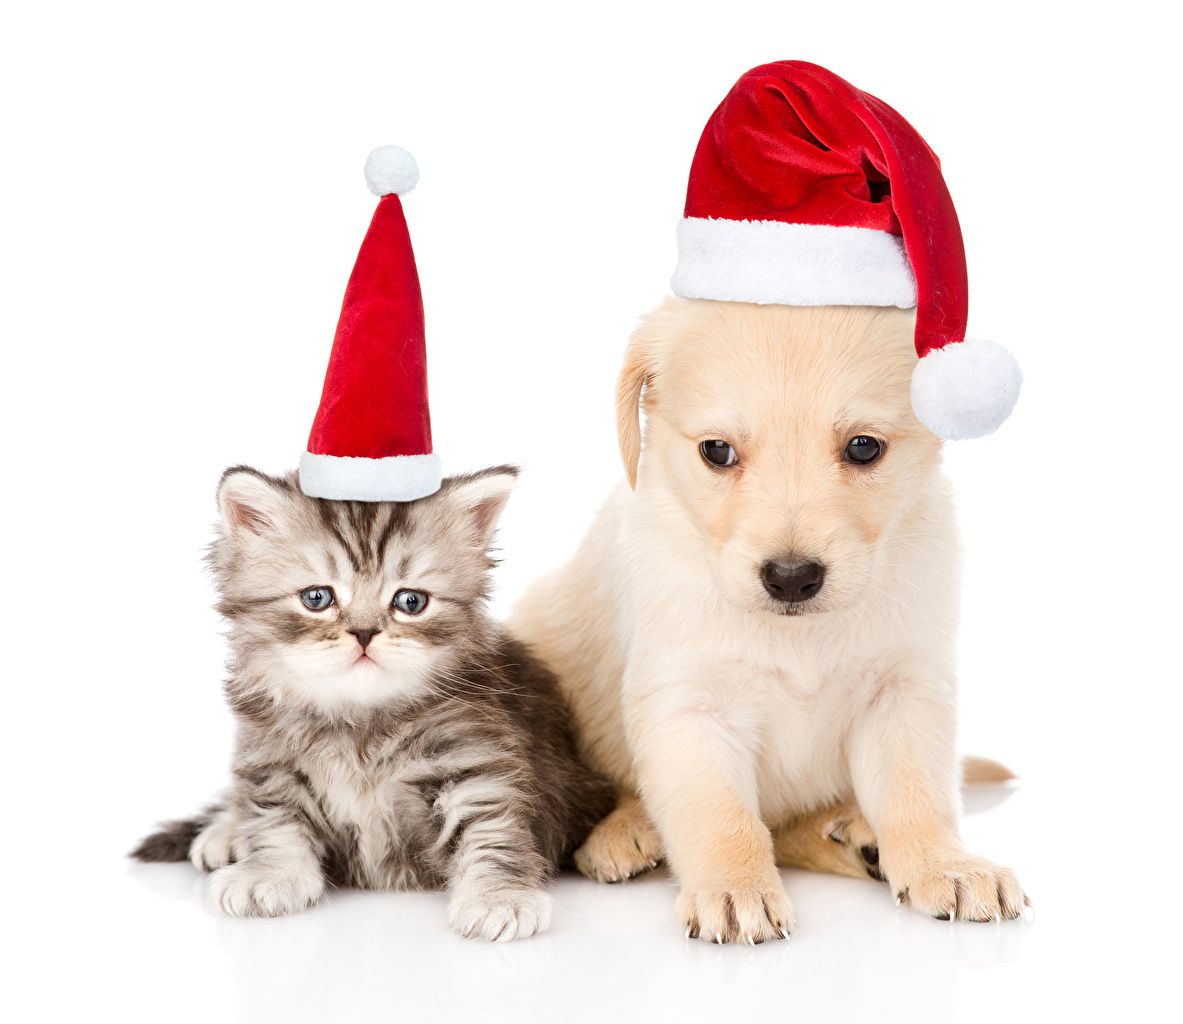 Wallpaper Kittens puppies Retriever Cats Dogs New year Two Winter